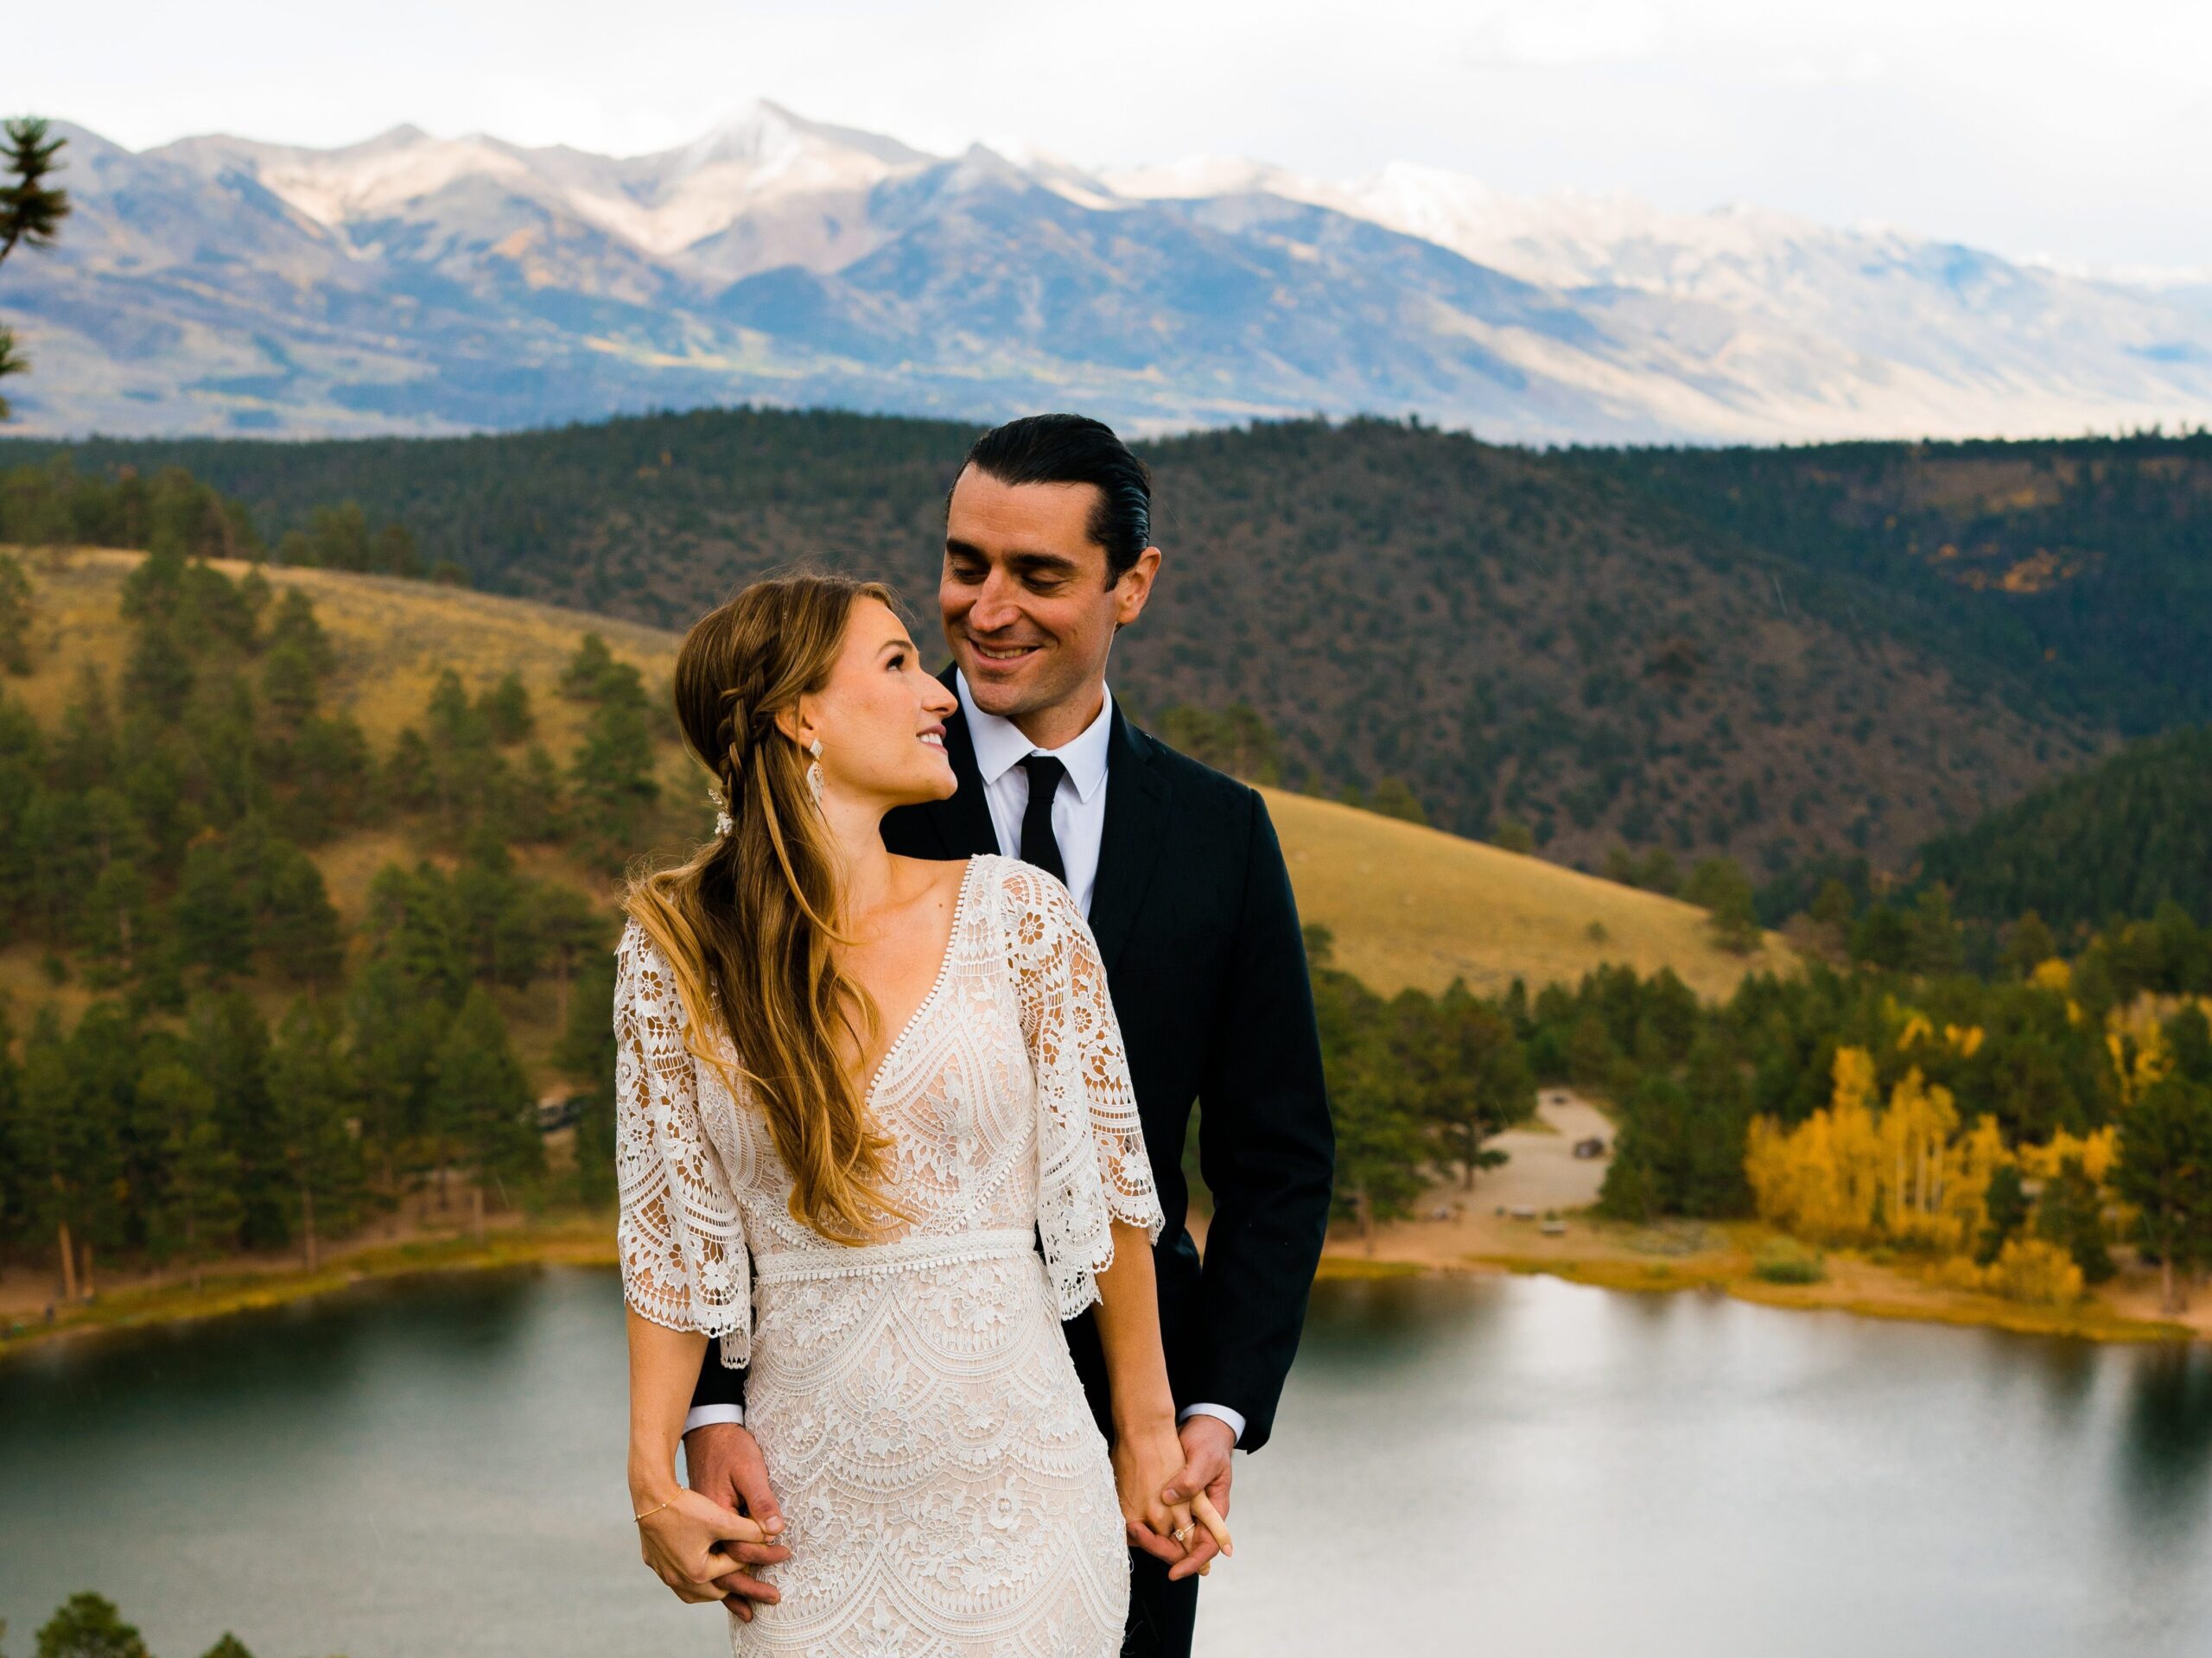 bride and groom holding hands and smiling at eachother in front of the crestone mountains during their colorado springs elopement